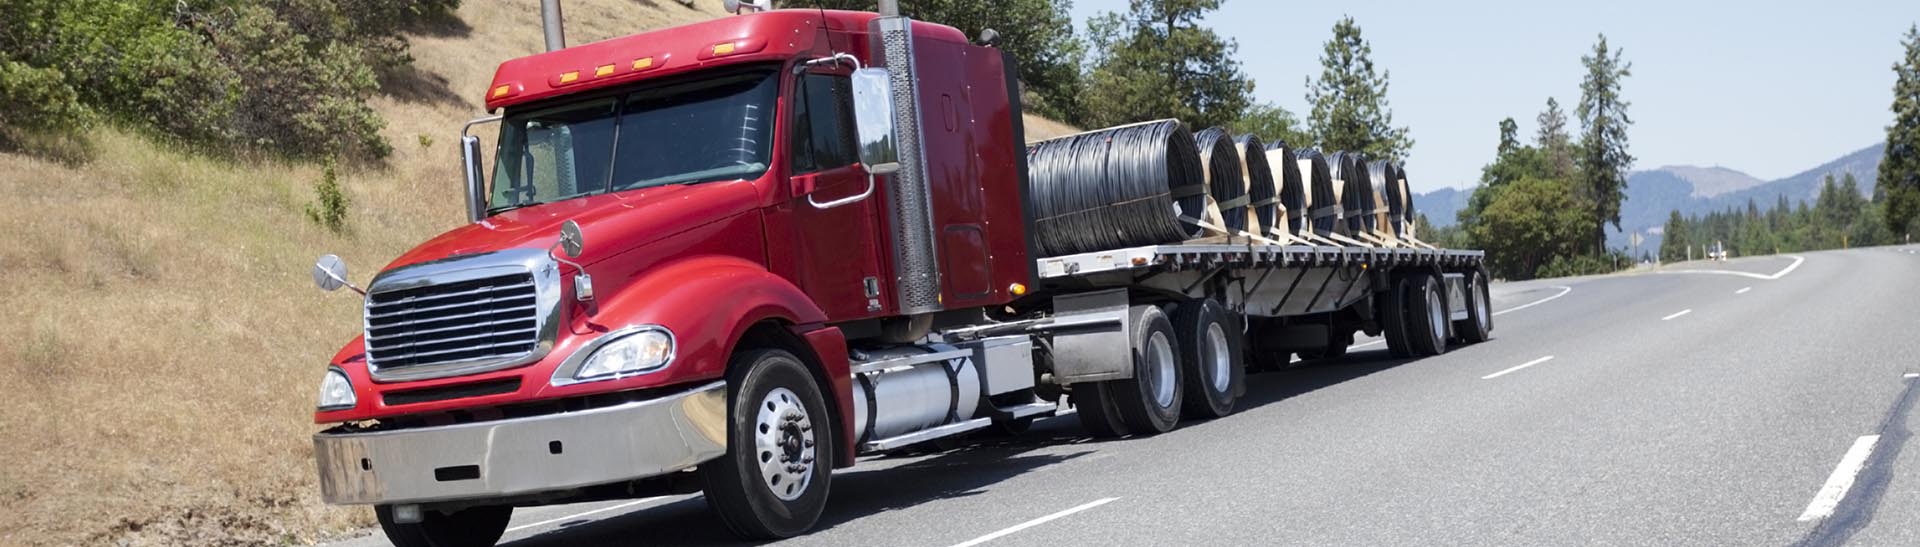 Dallas Long Haul Trucking, Trucking Services and Trucking Company